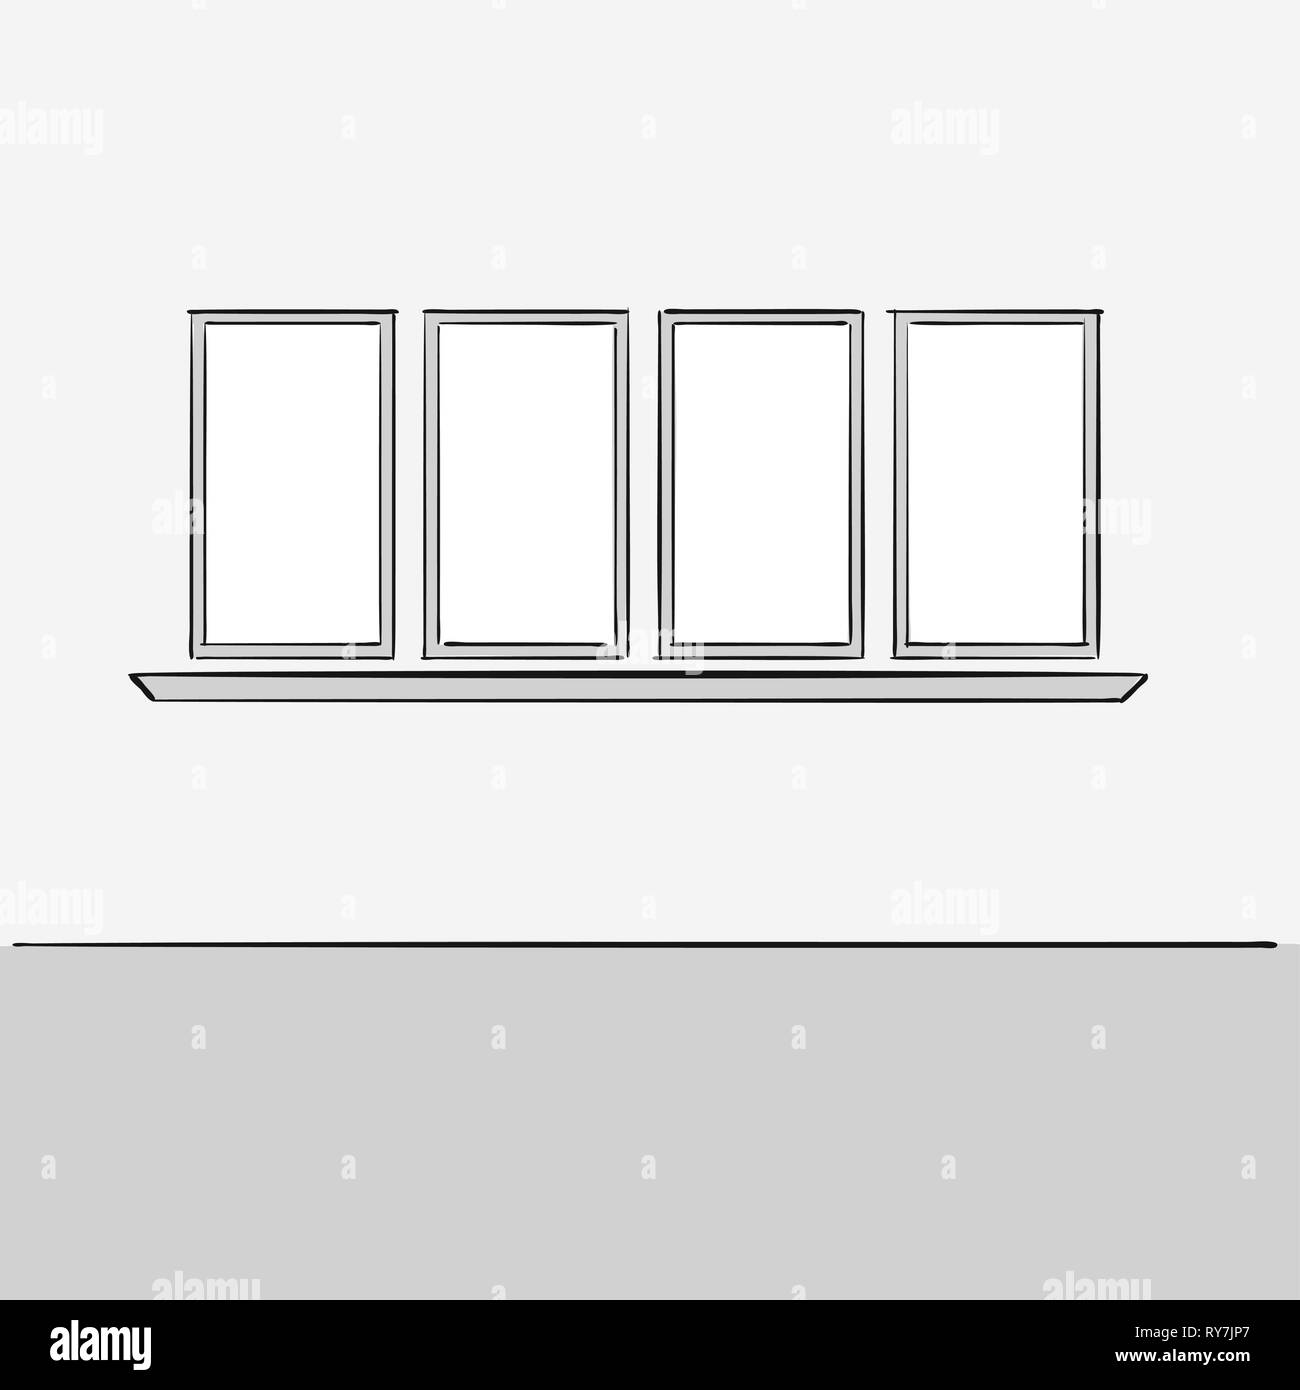 Empty office wall with windows. Hand drawn vector illustration. Series of sketched business backgrounds. Stock Vector